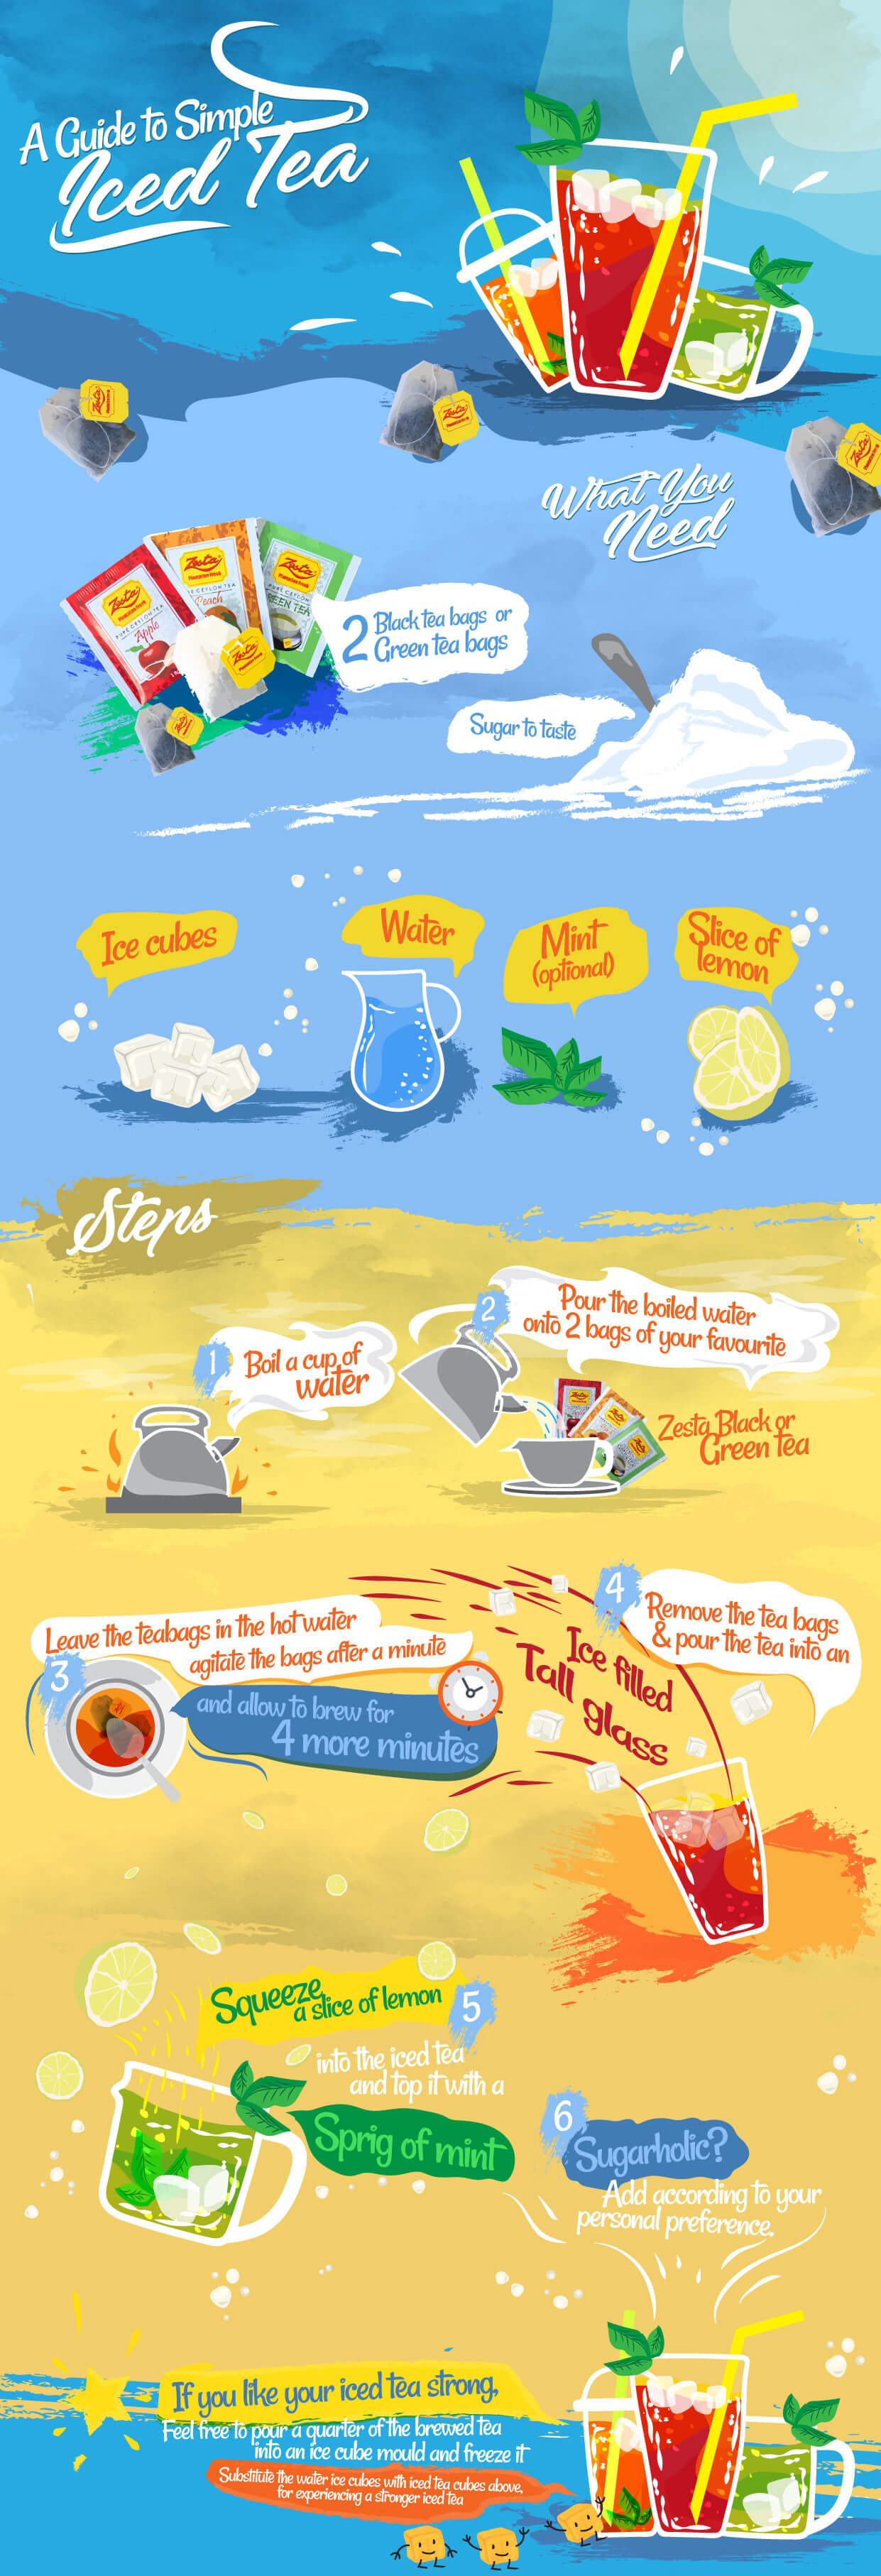 A Guide To Simple Iced Tea